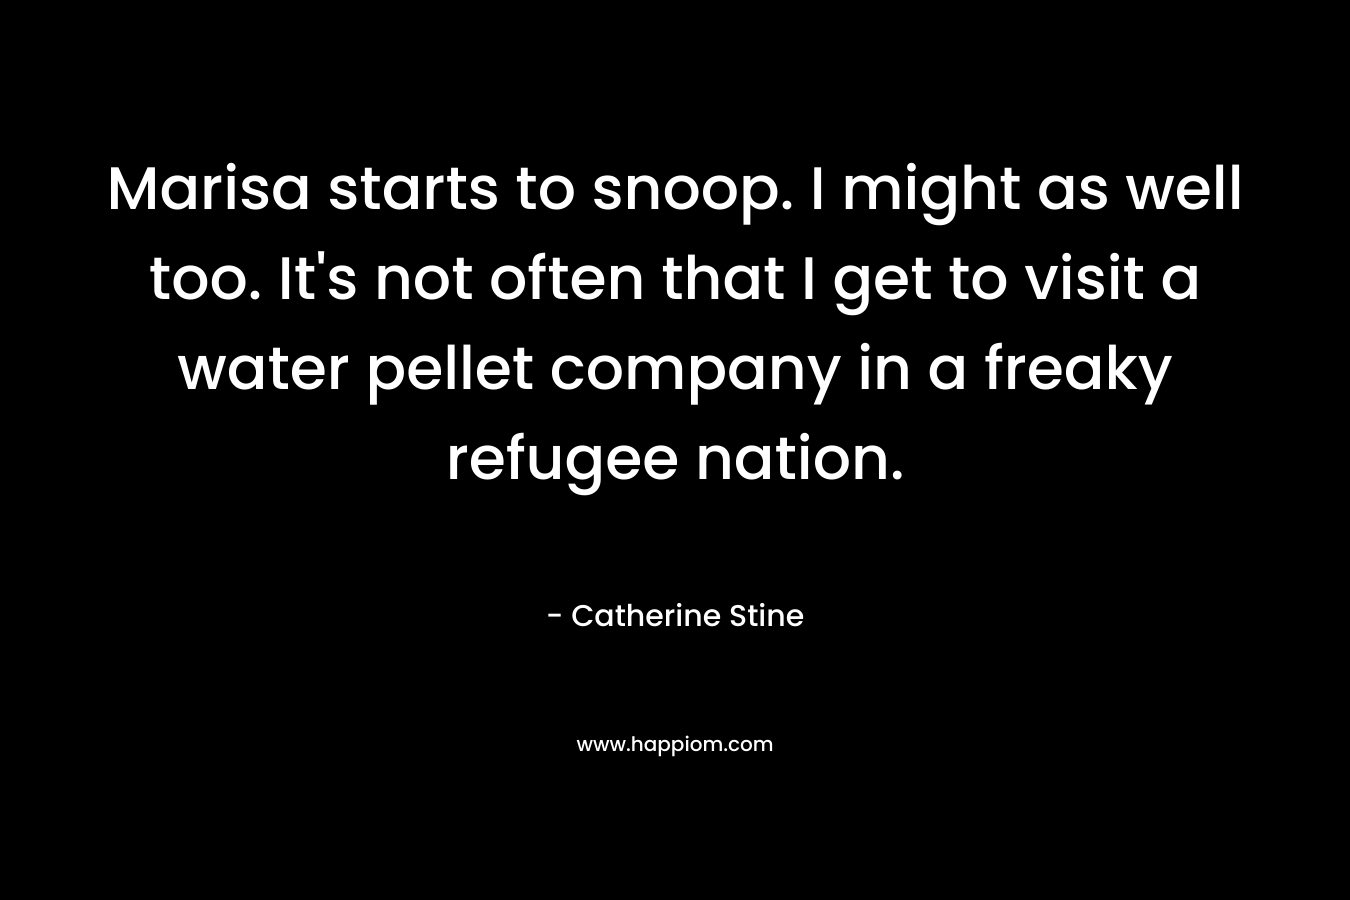 Marisa starts to snoop. I might as well too. It’s not often that I get to visit a water pellet company in a freaky refugee nation. – Catherine Stine